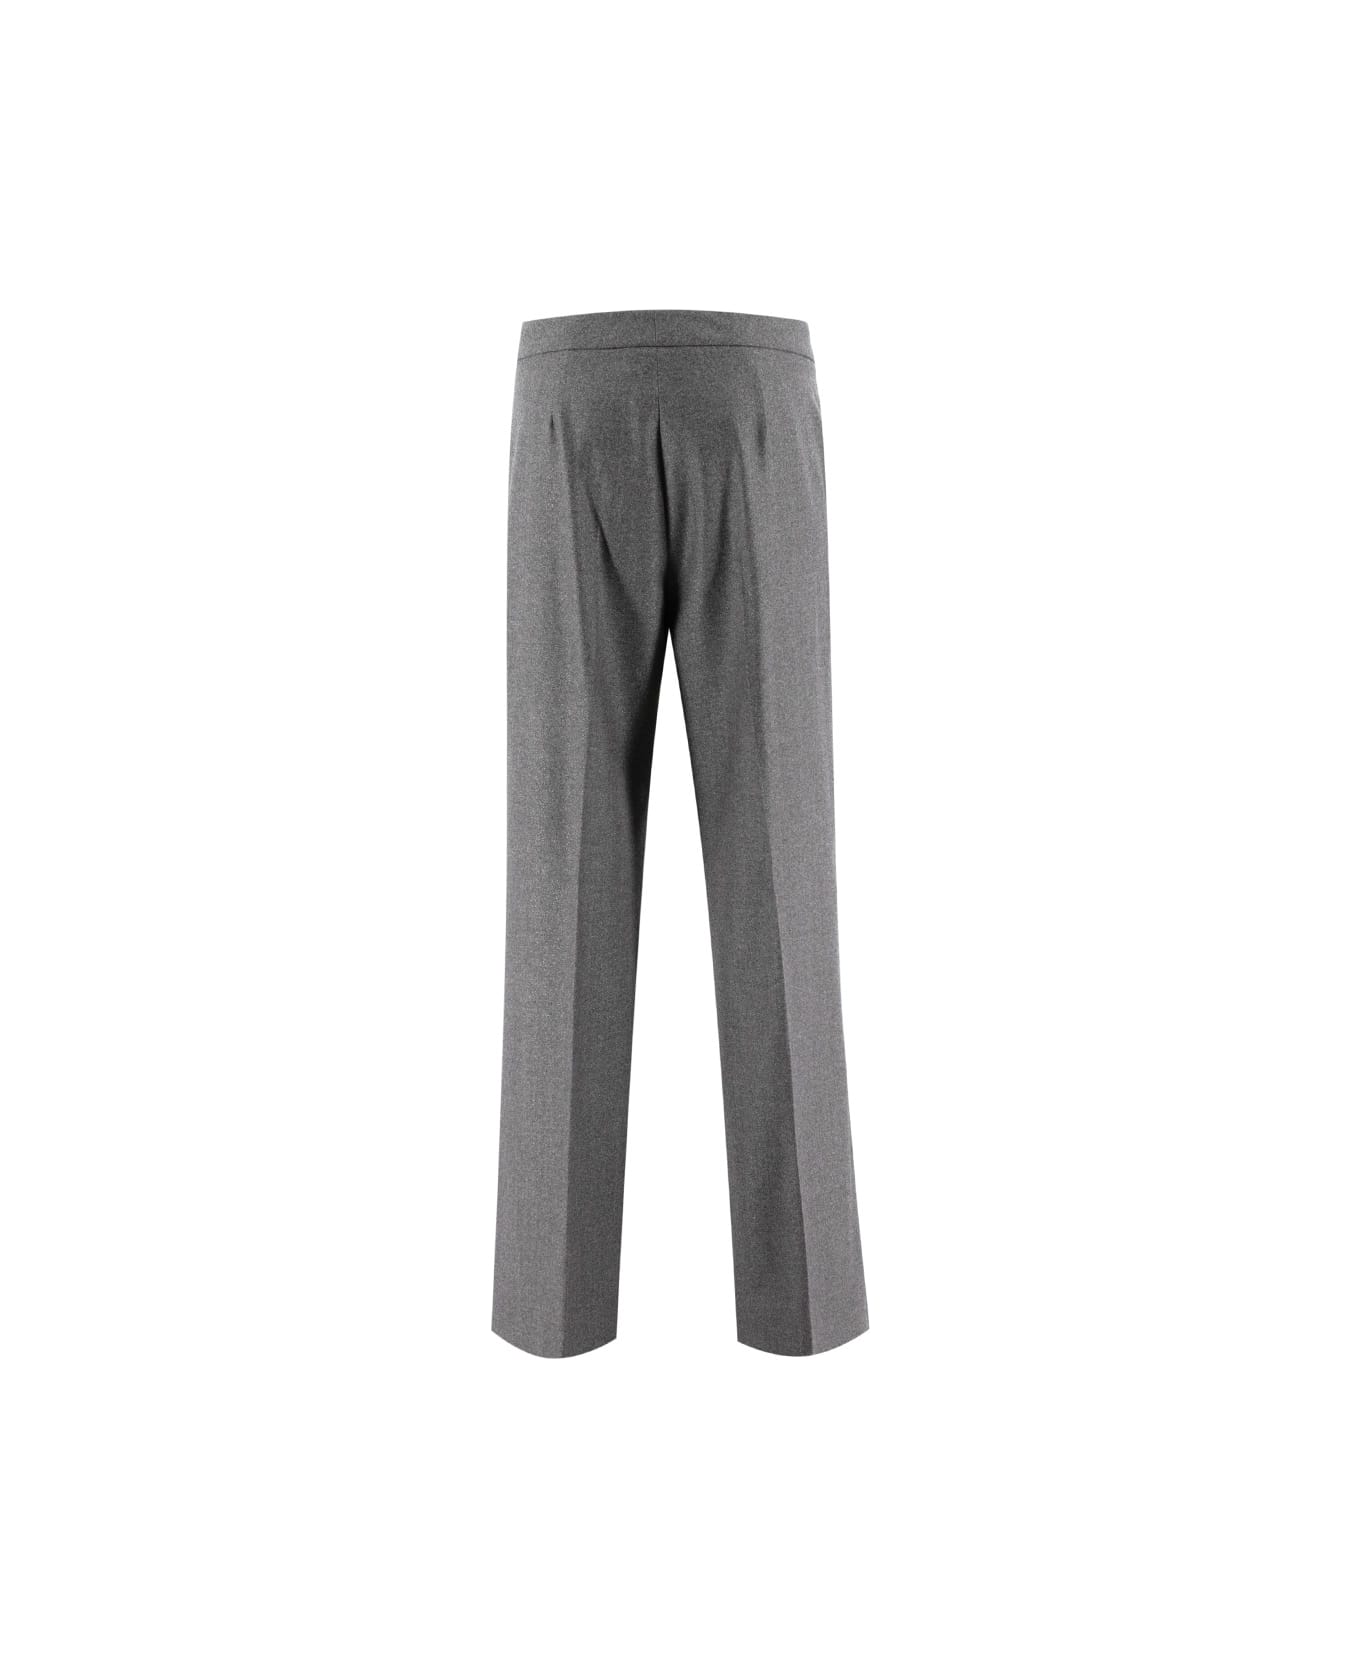 Le Tricot Perugia Trousers - GREY LUREX           ボトムス